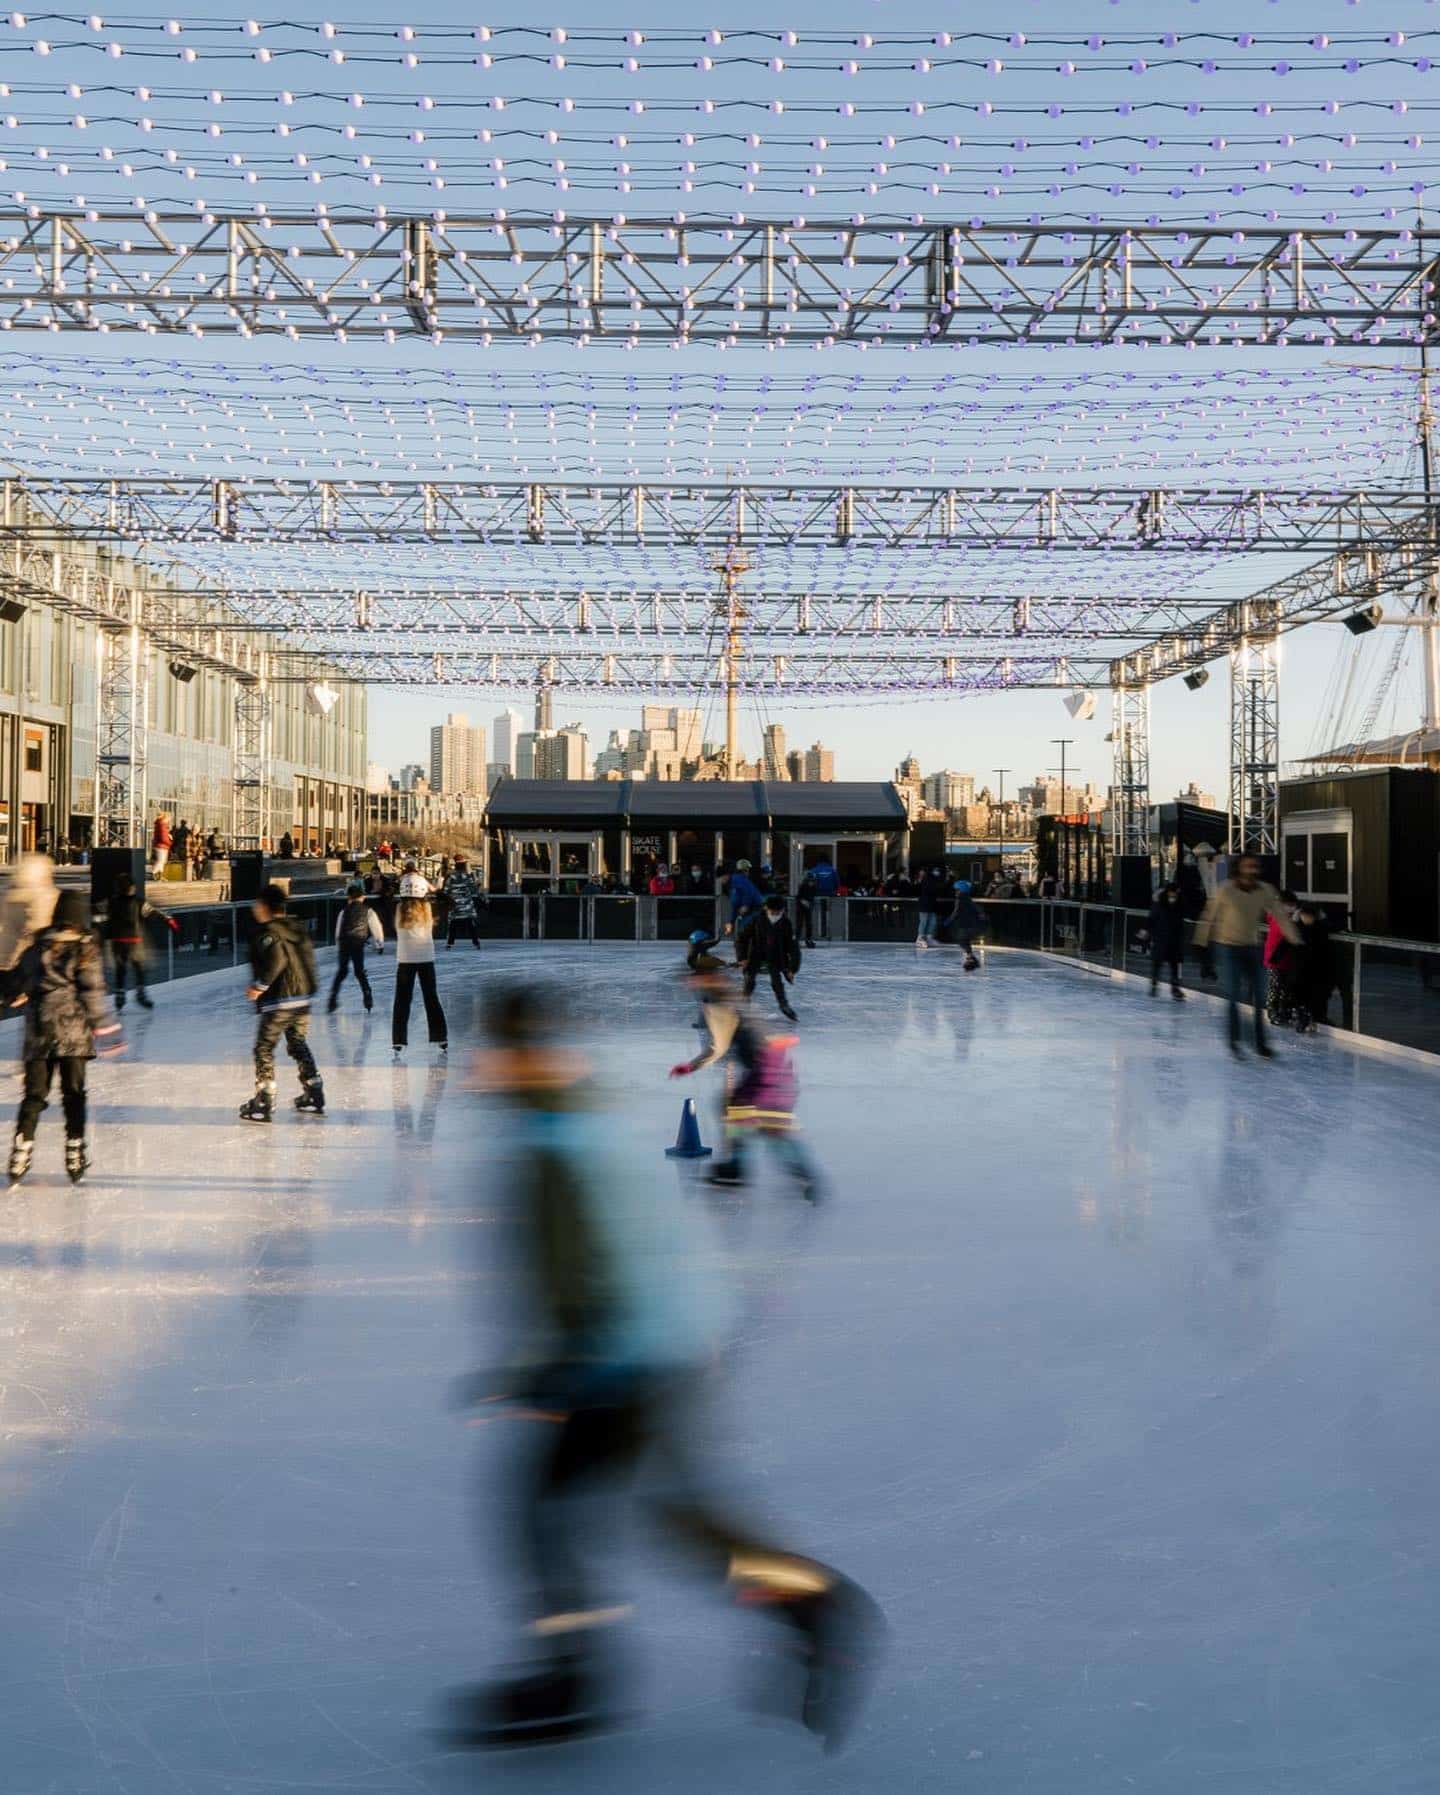 Lace up. It’s the last month for family-fun on the ice ⛸ Book now ➤ link in bio. #TheSeaport